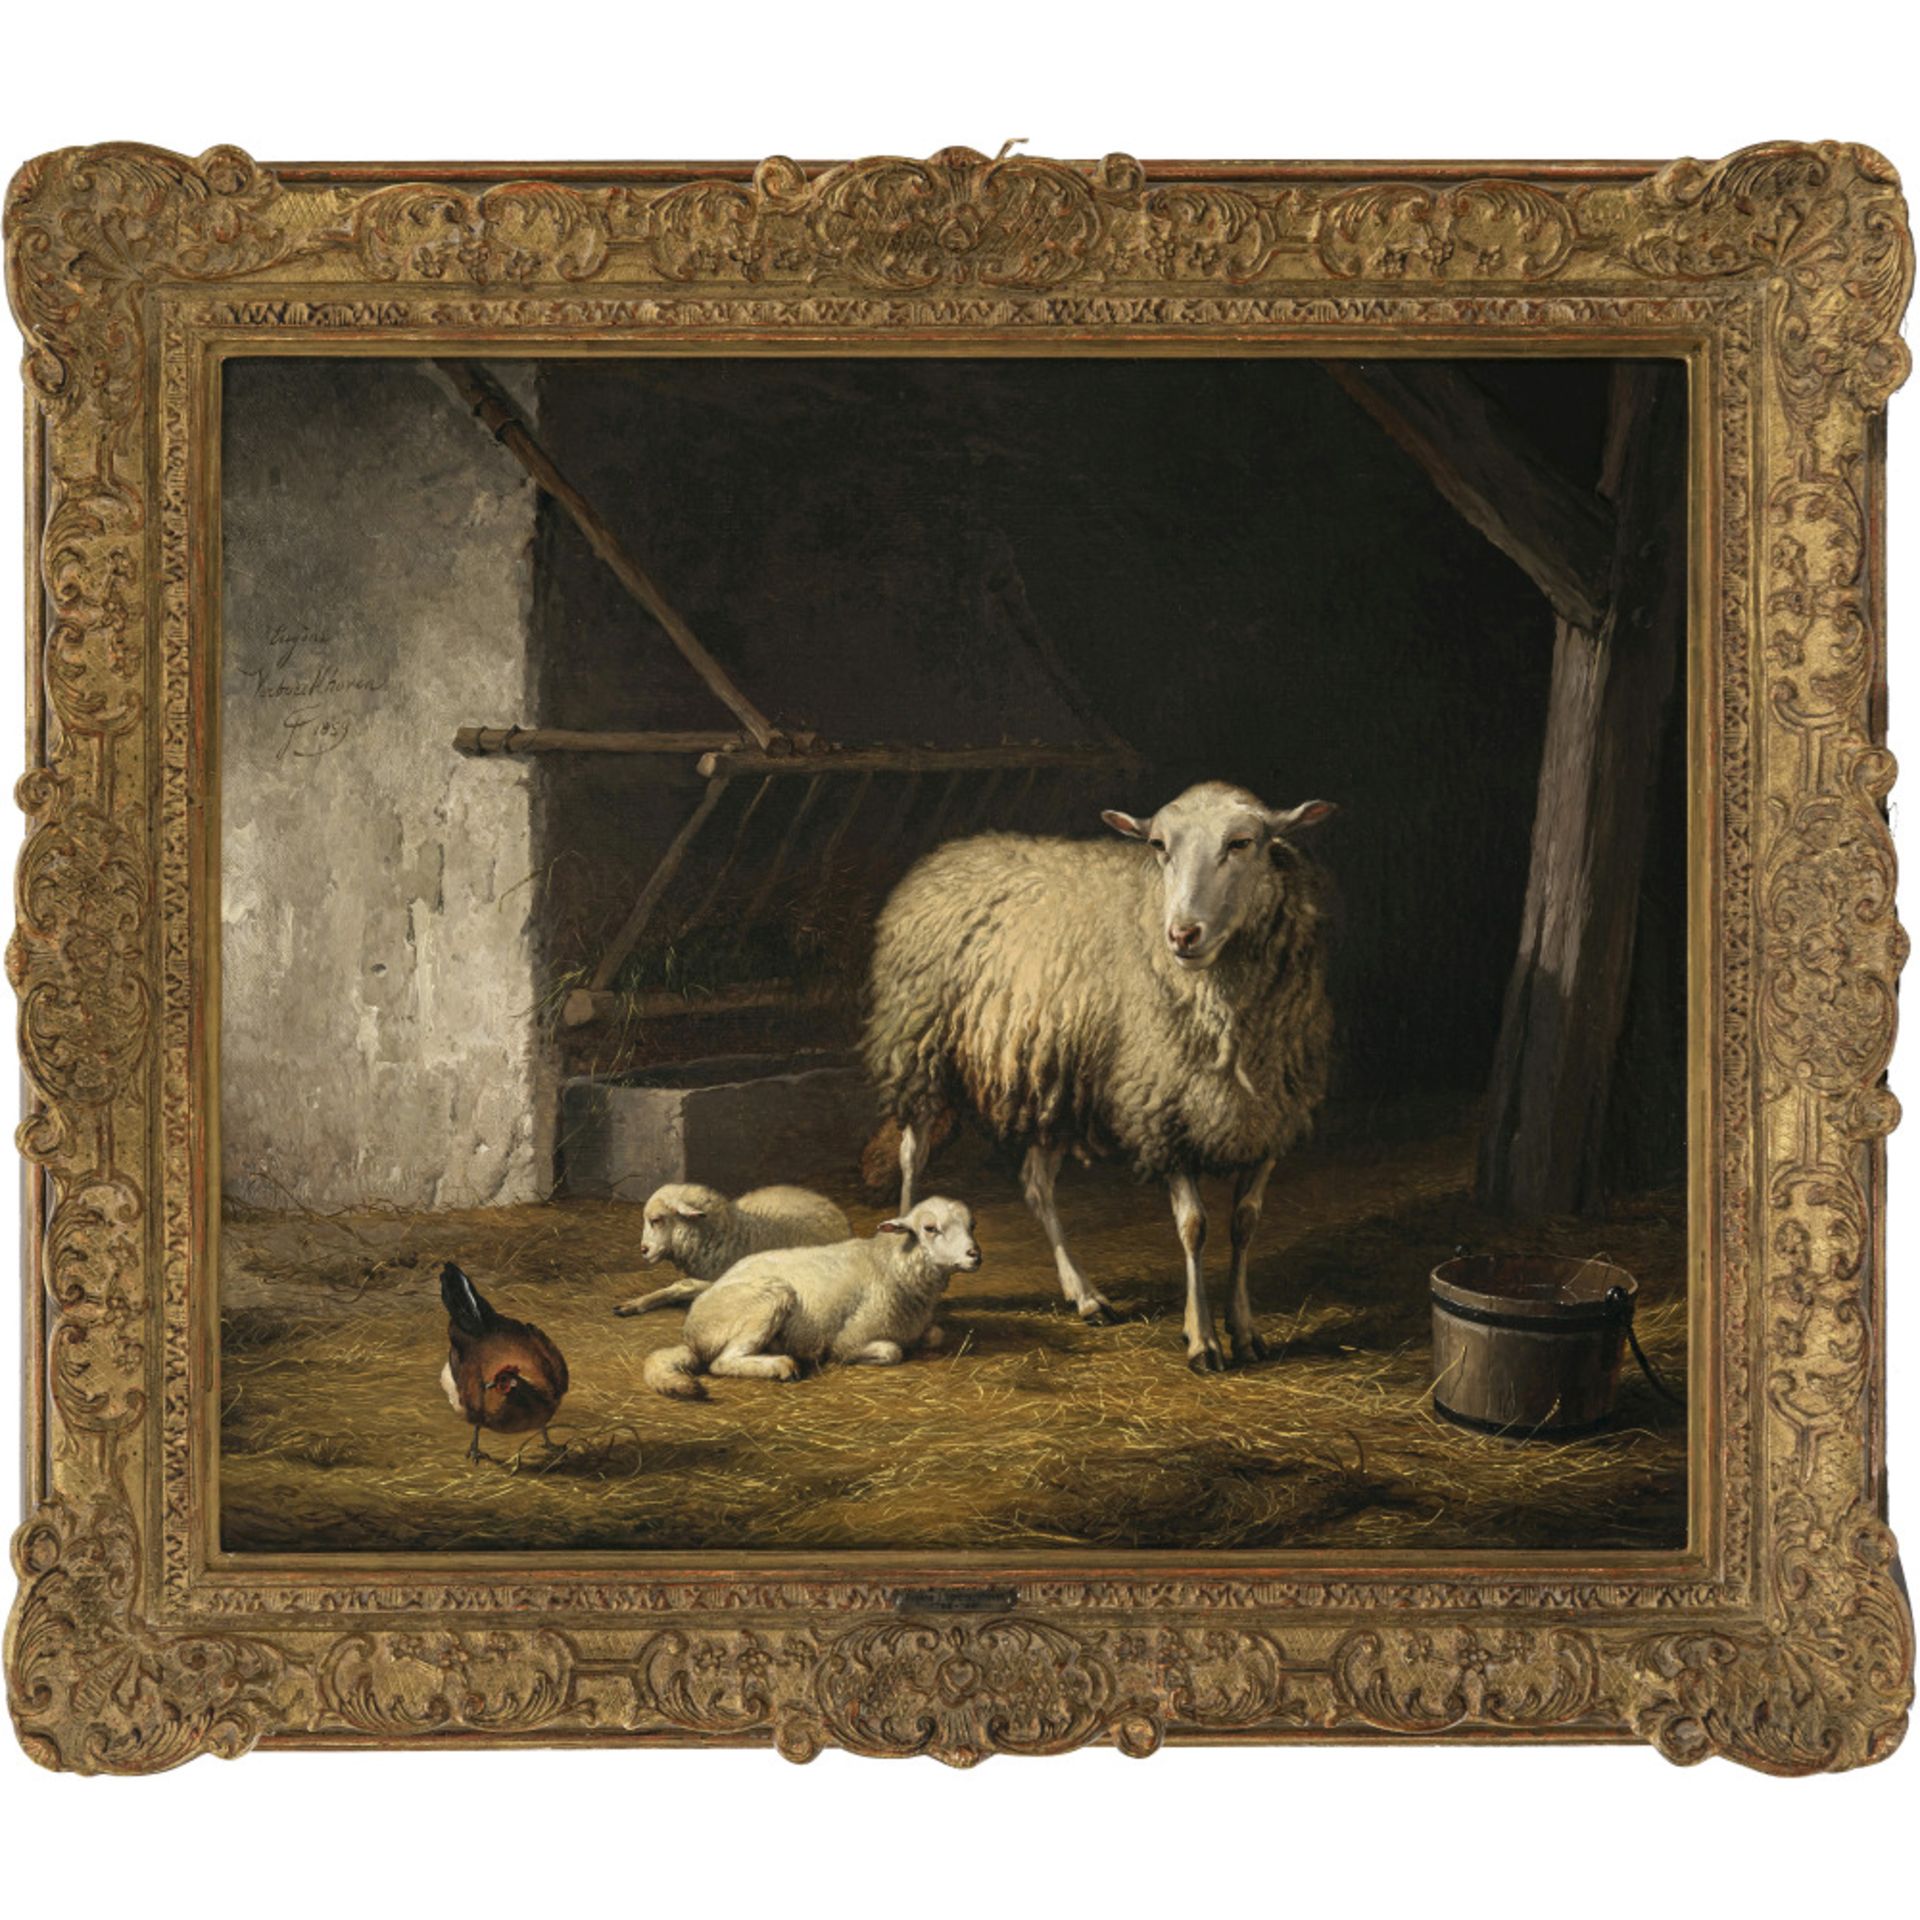 Eugène Verboeckhoven - Sheep and a chicken in a stable - Image 2 of 2